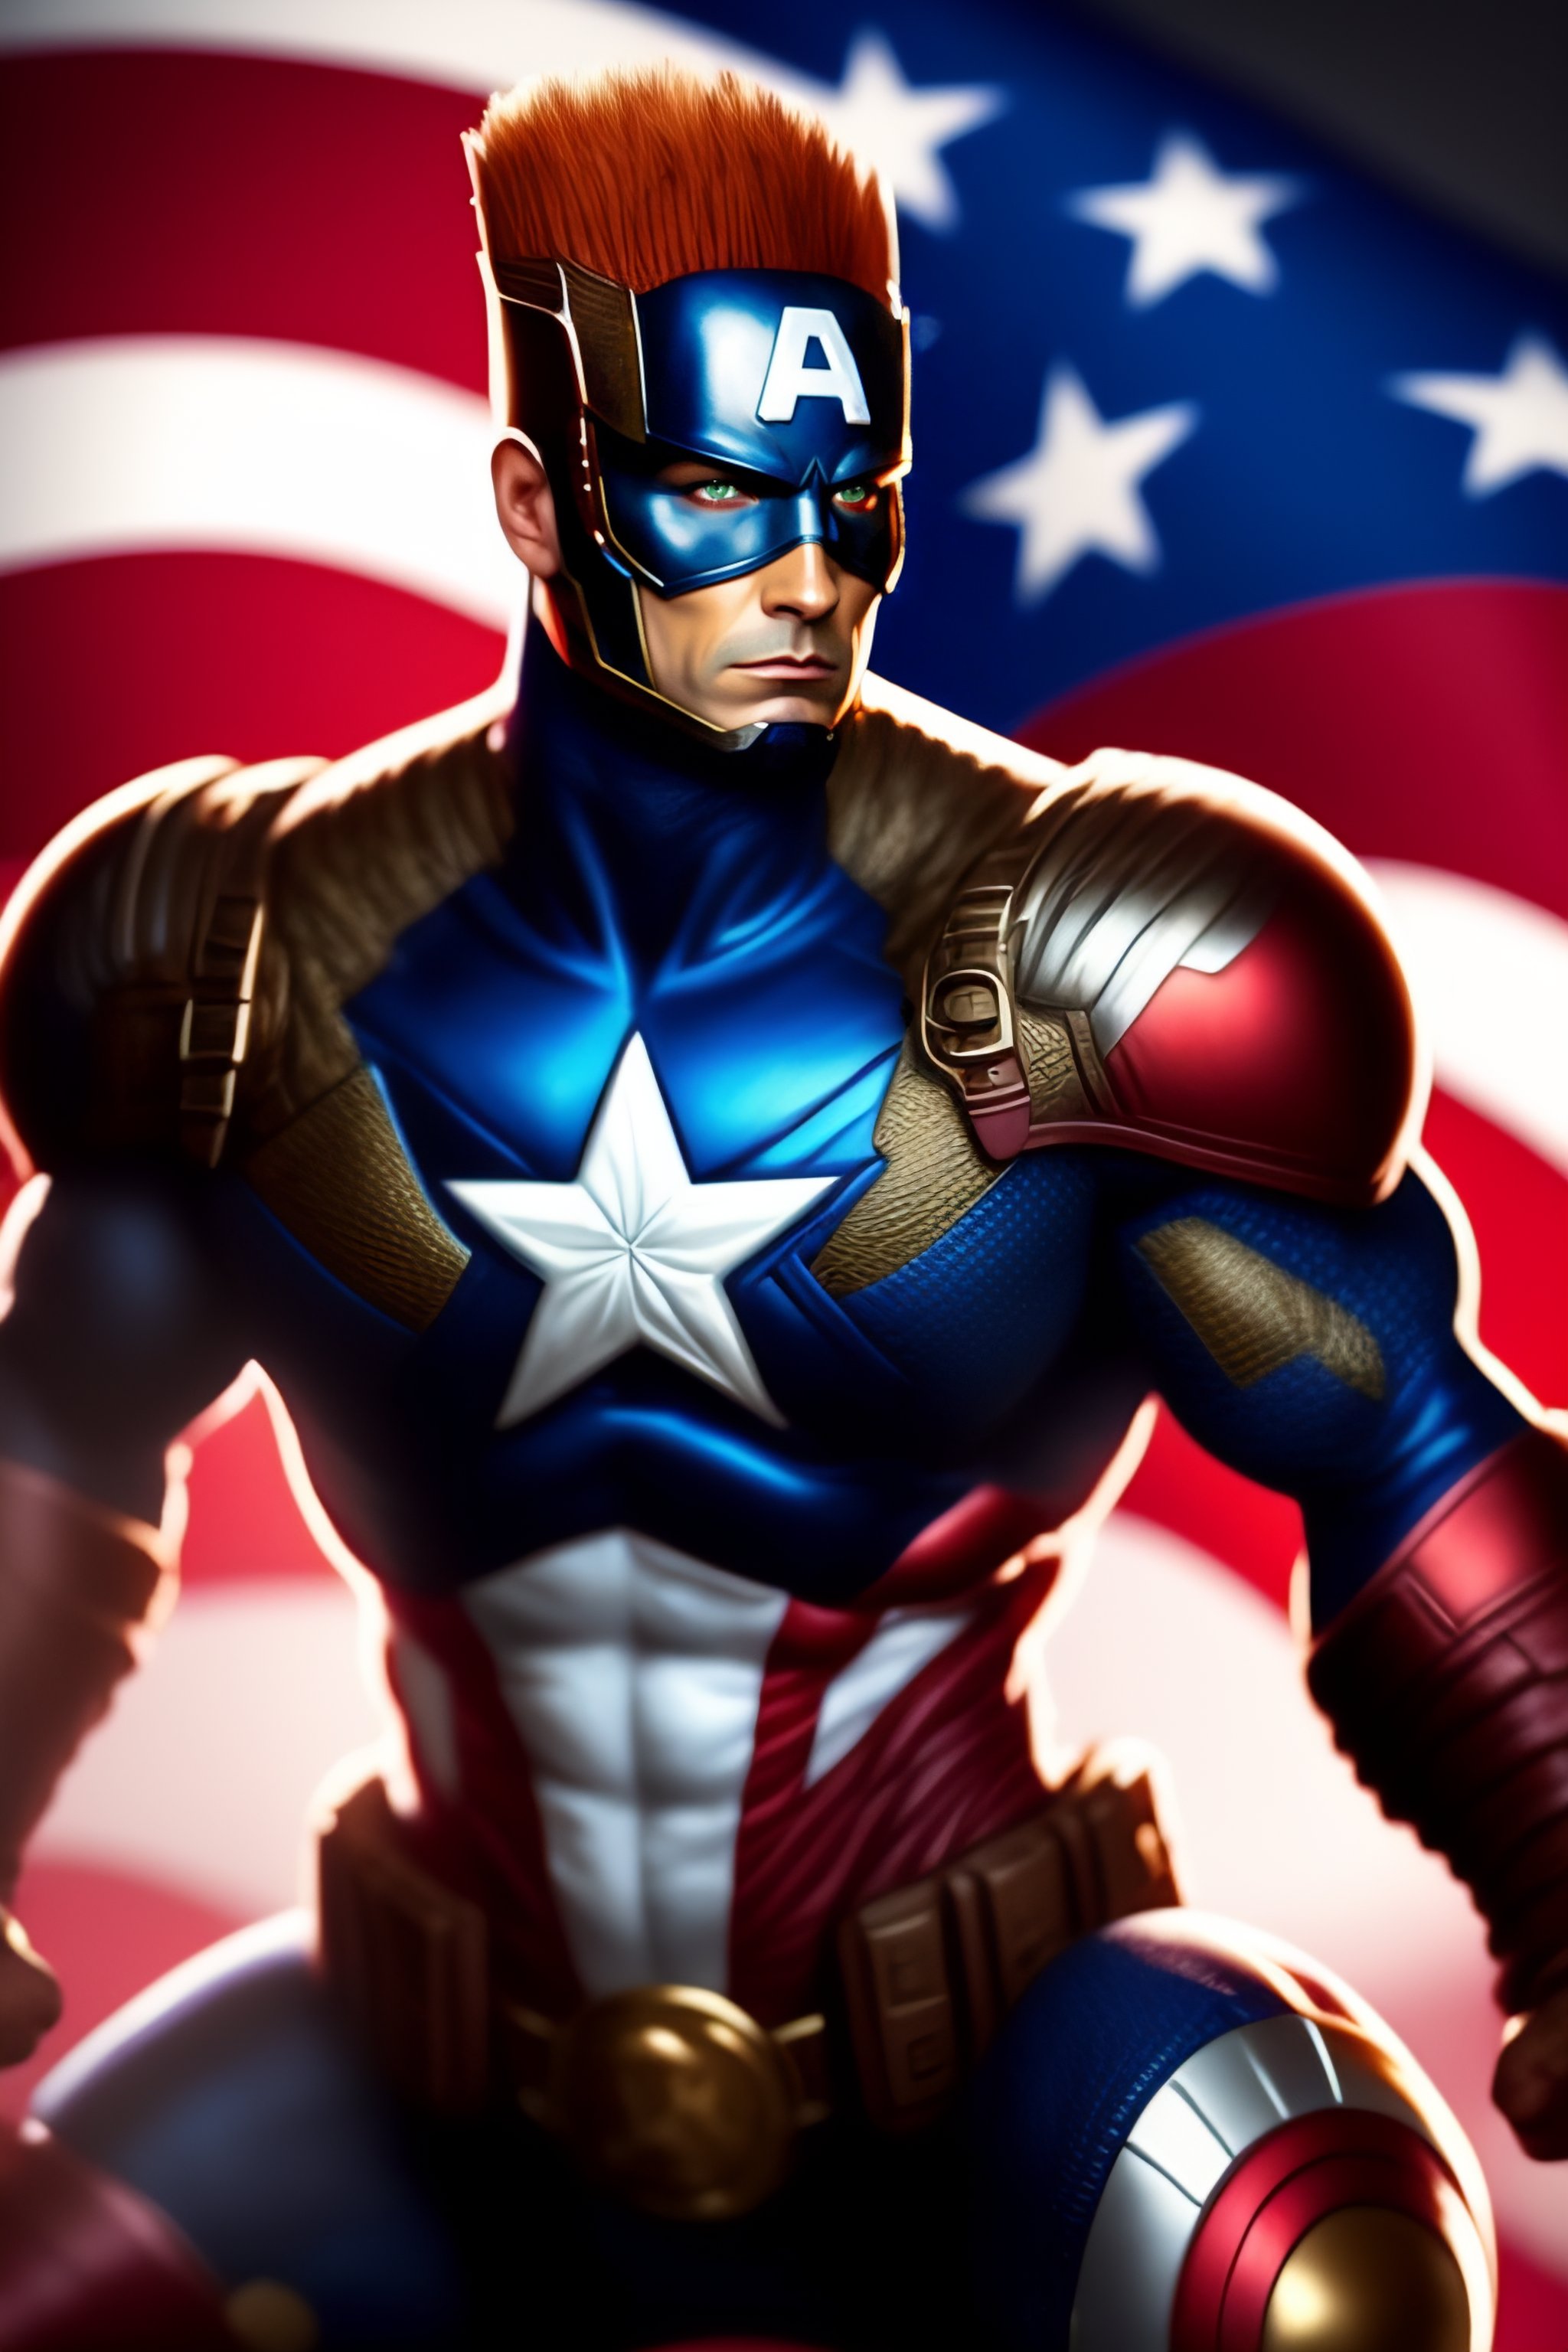 Captain America (WWII)  Marvel Contest of Champions